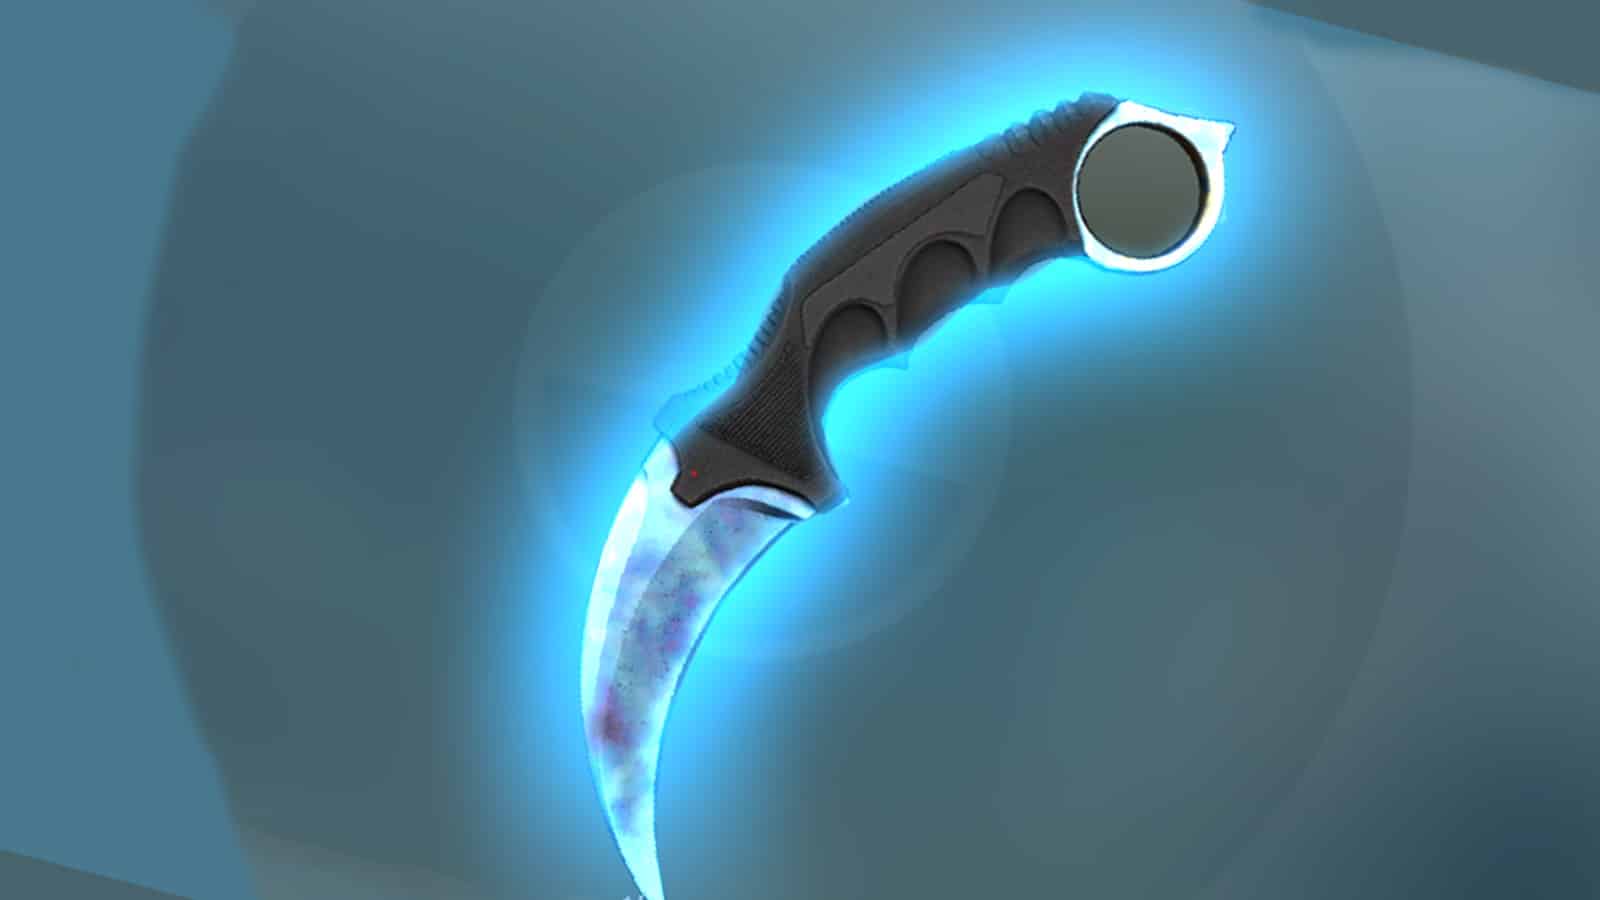 2022] Why The Best 10 Karambit CSGO Skins Are So Expensive?